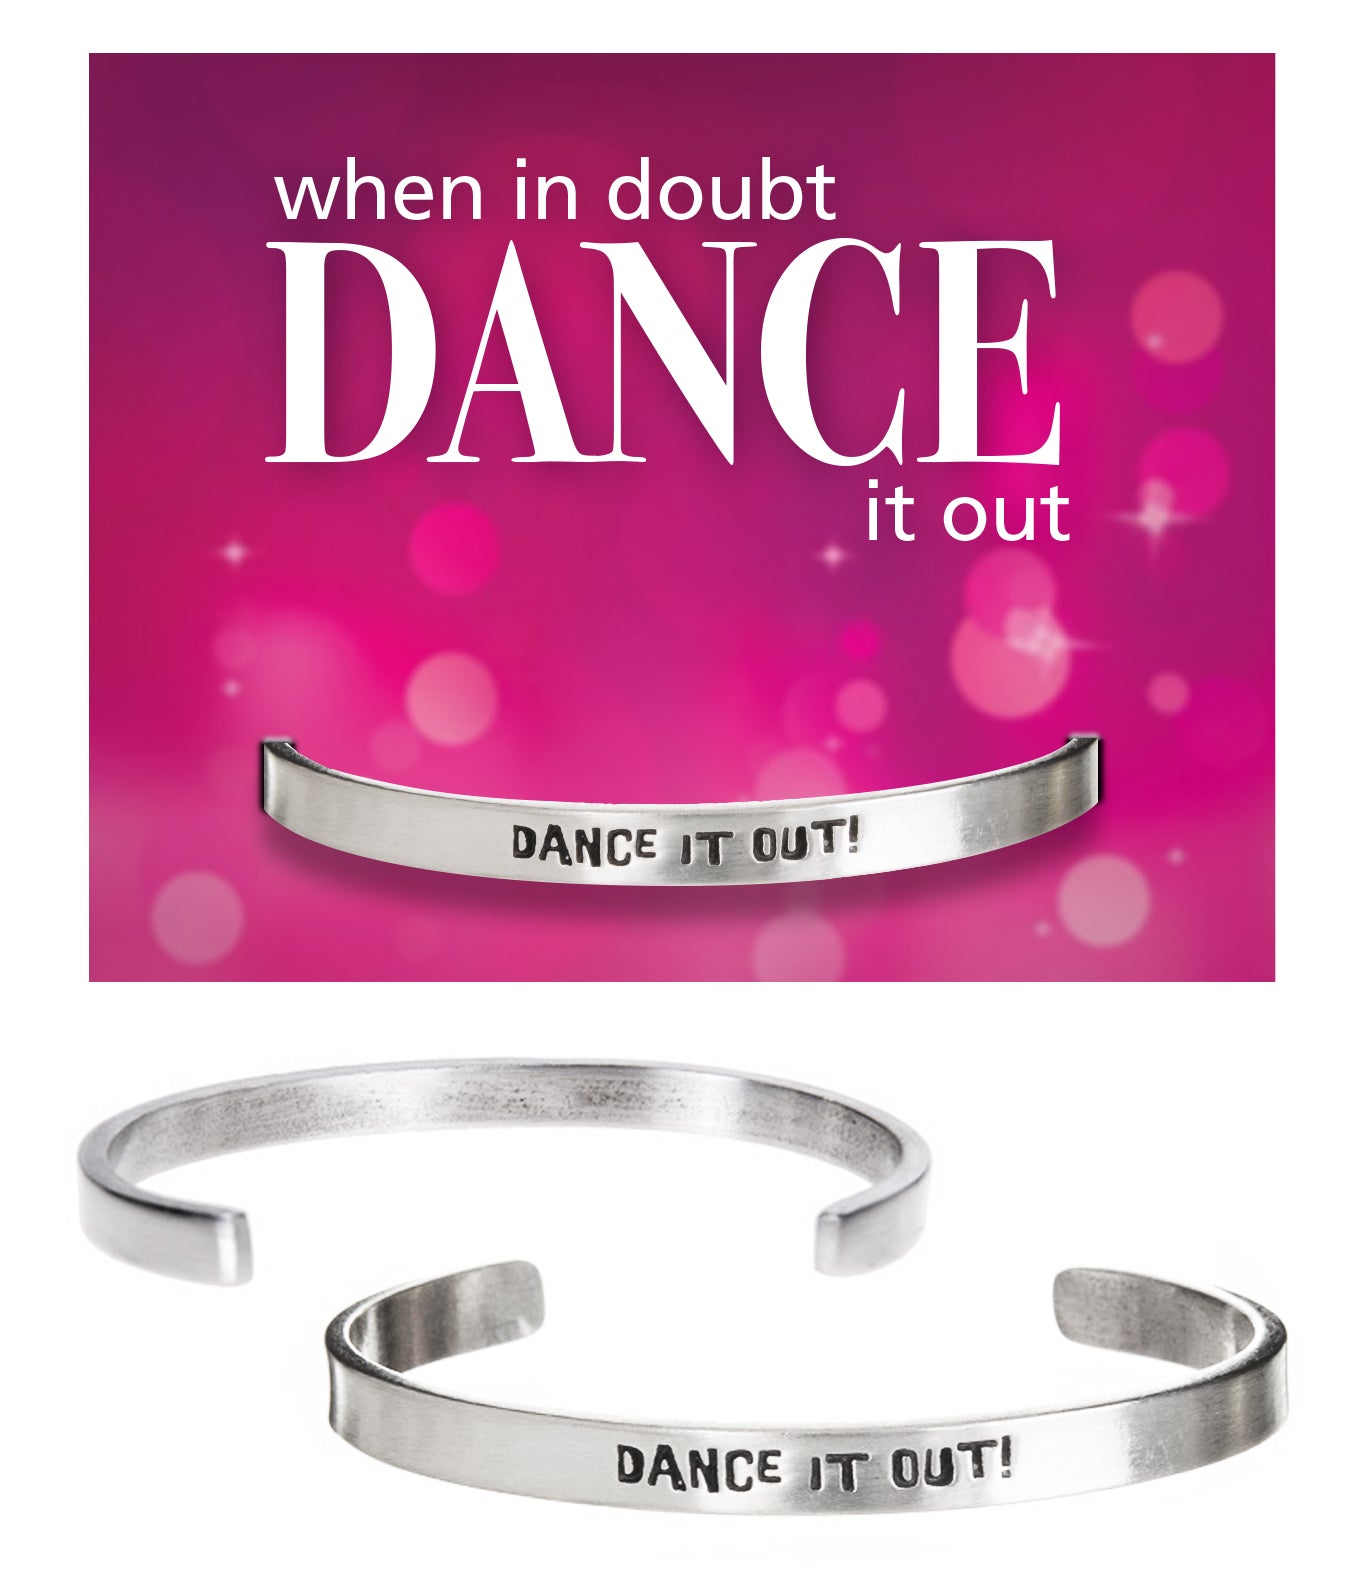 Dance it Out Quotable Cuff Bracelet with backer card